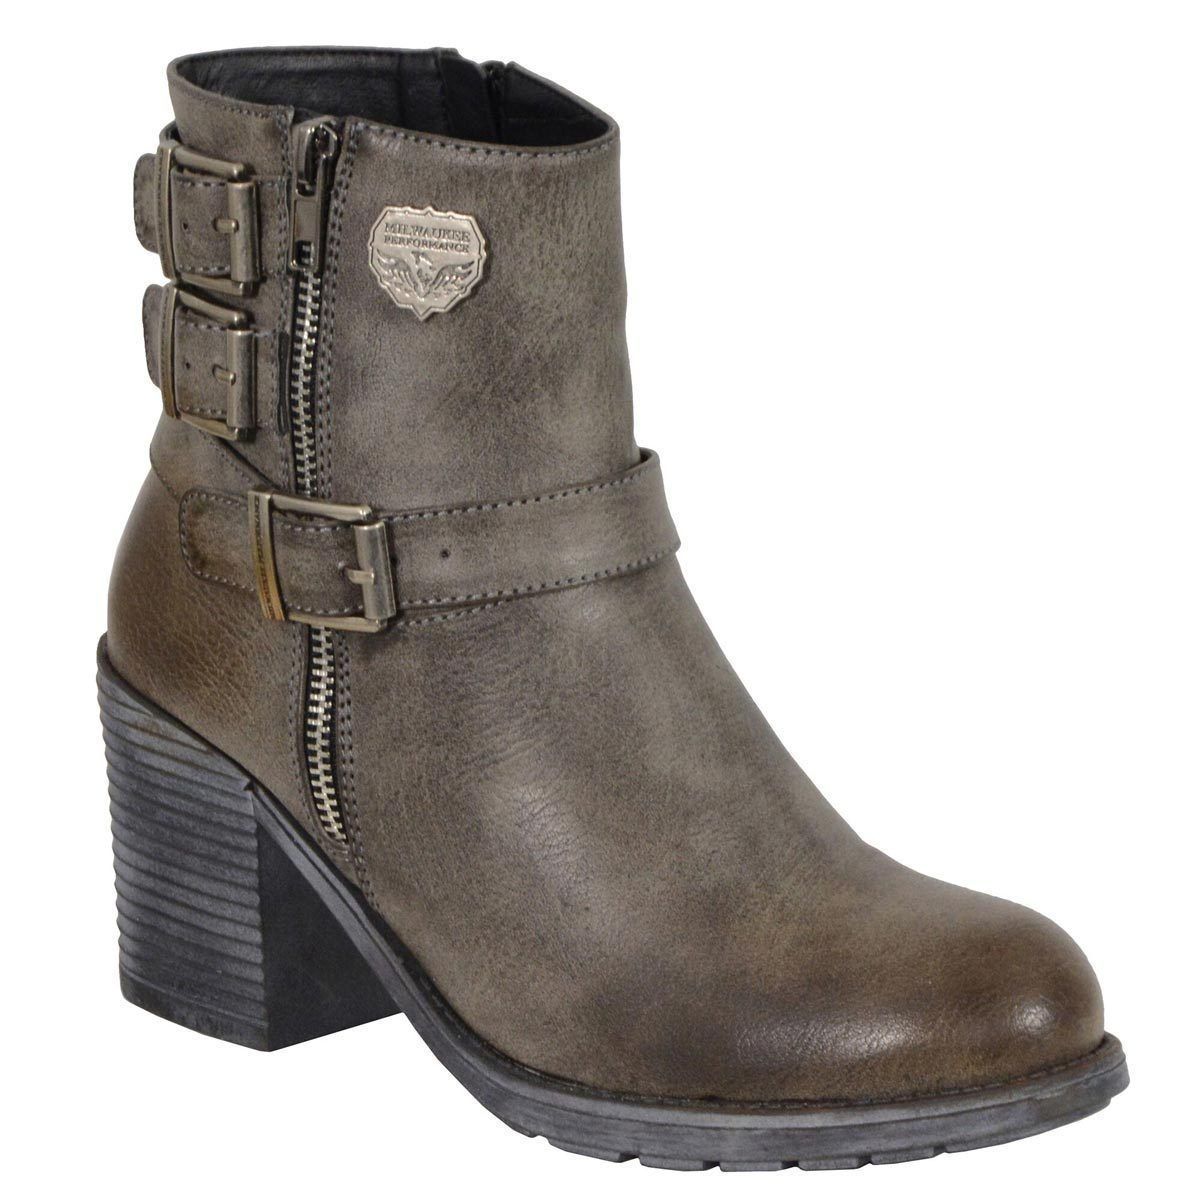 Milwaukee Leather MBL9406 Women's Stone Grey 3-Buckle Leather Boots with Platform Heel